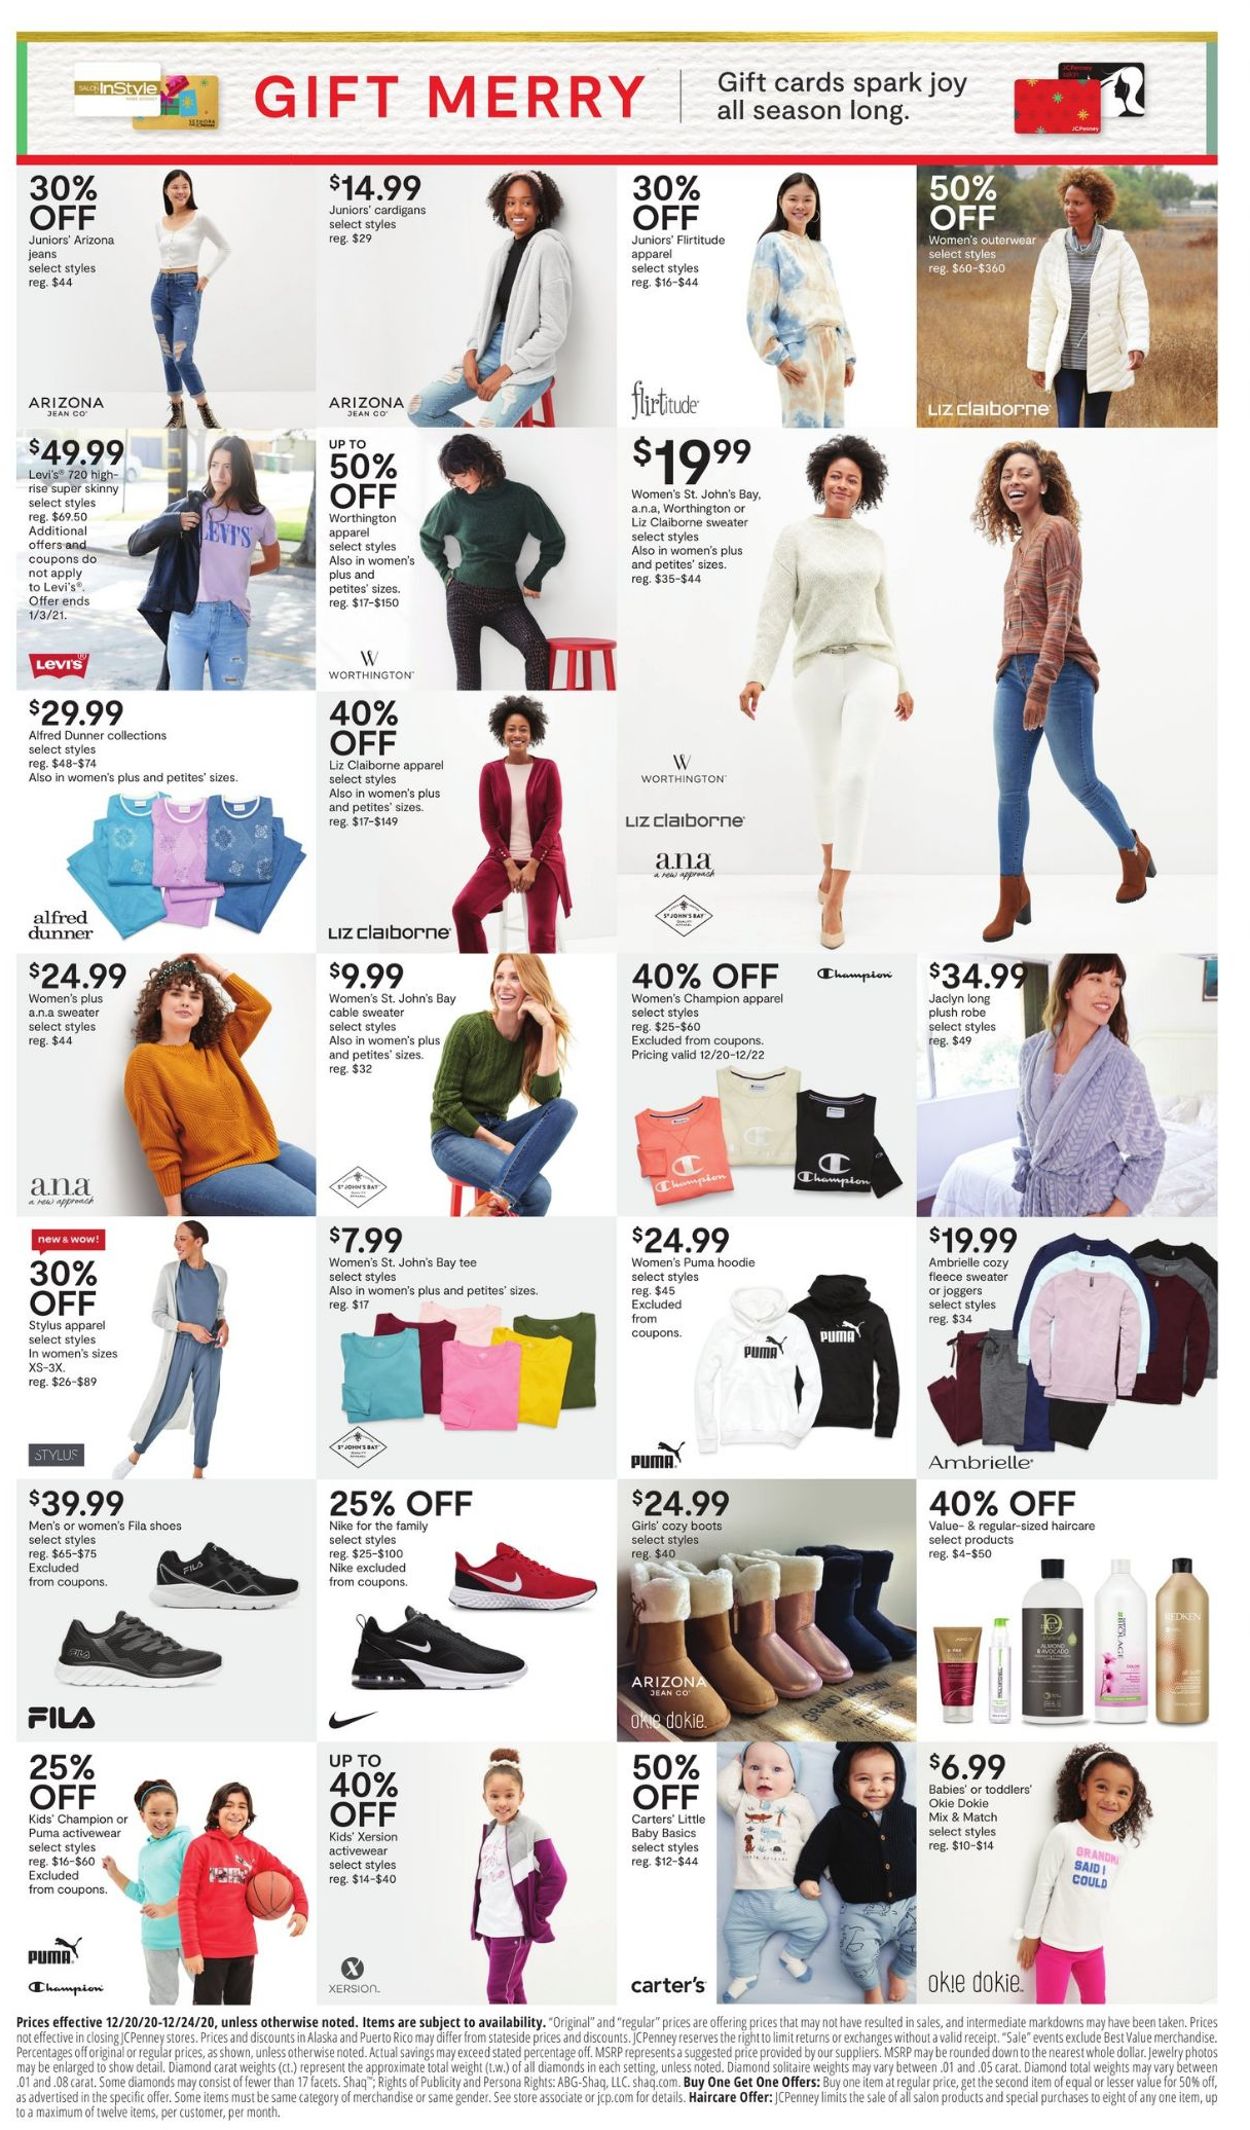 JCPenney Wrap Up The Joy Sale 2020 Weekly Ad Circular - valid 12/20-12/24/2020 (Page 3)